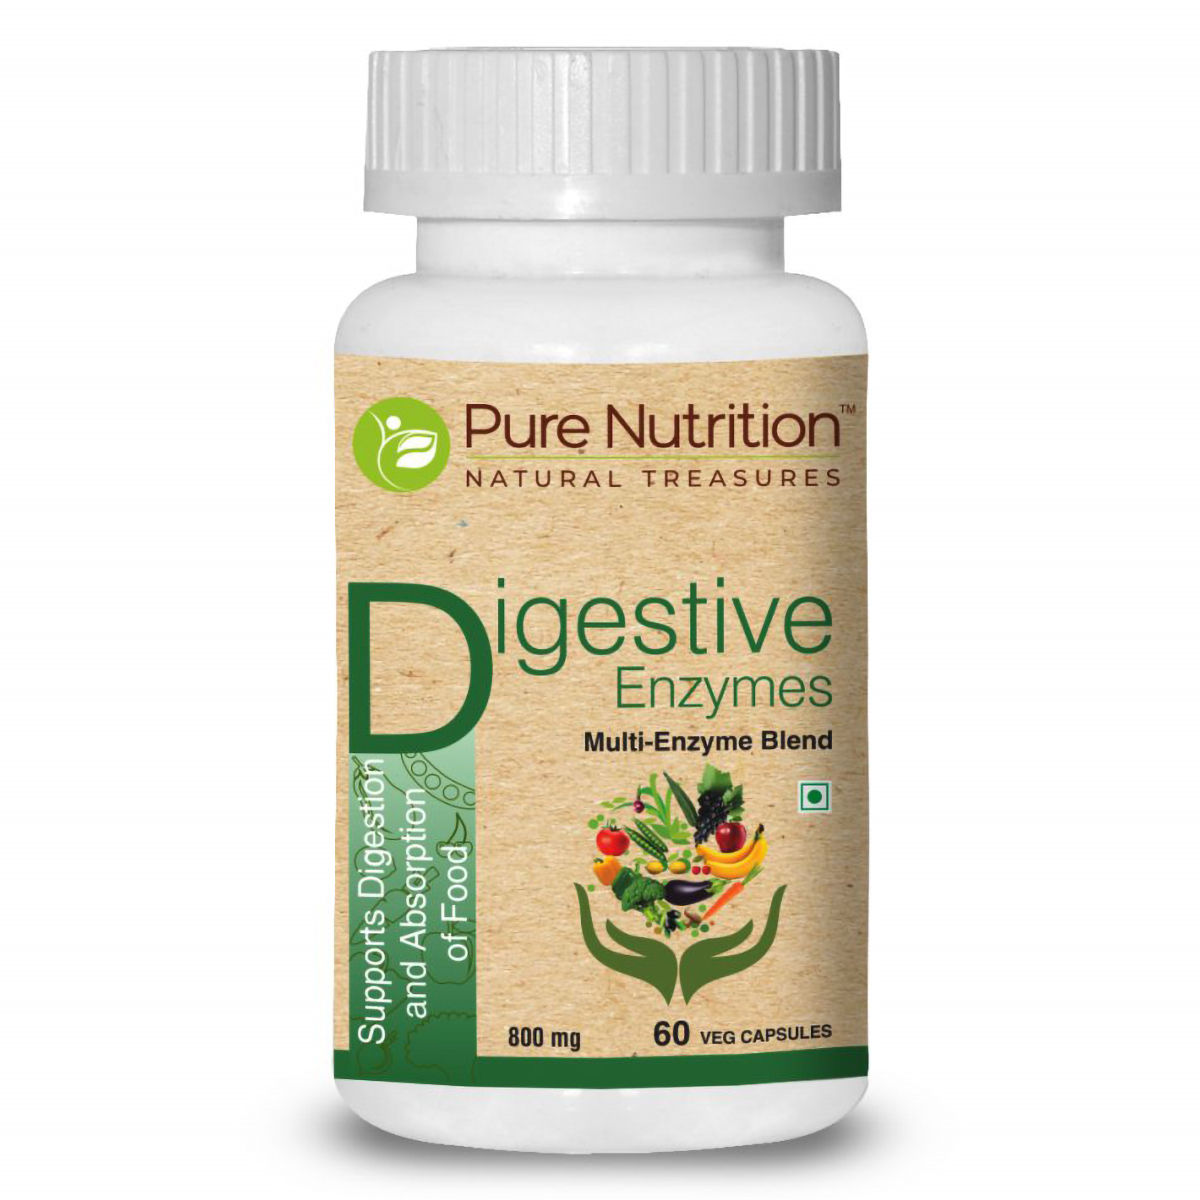 Buy Pure Nutrition Digestive Enzymes 800 mg, 60 Capsules Online